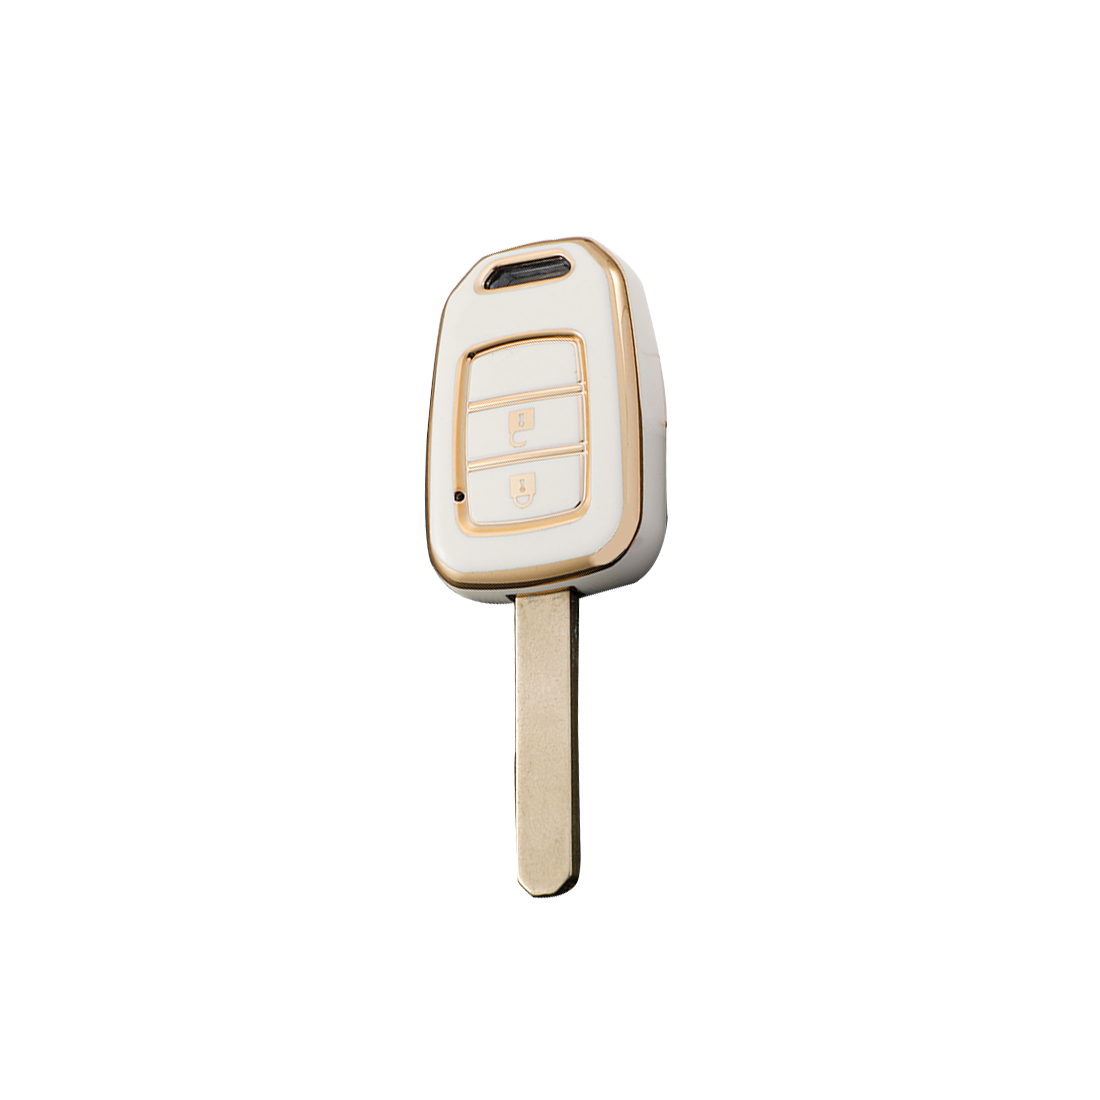 Acto TPU Gold Series Car Key Cover With TPU Gold Key Chain For Honda Mobilio